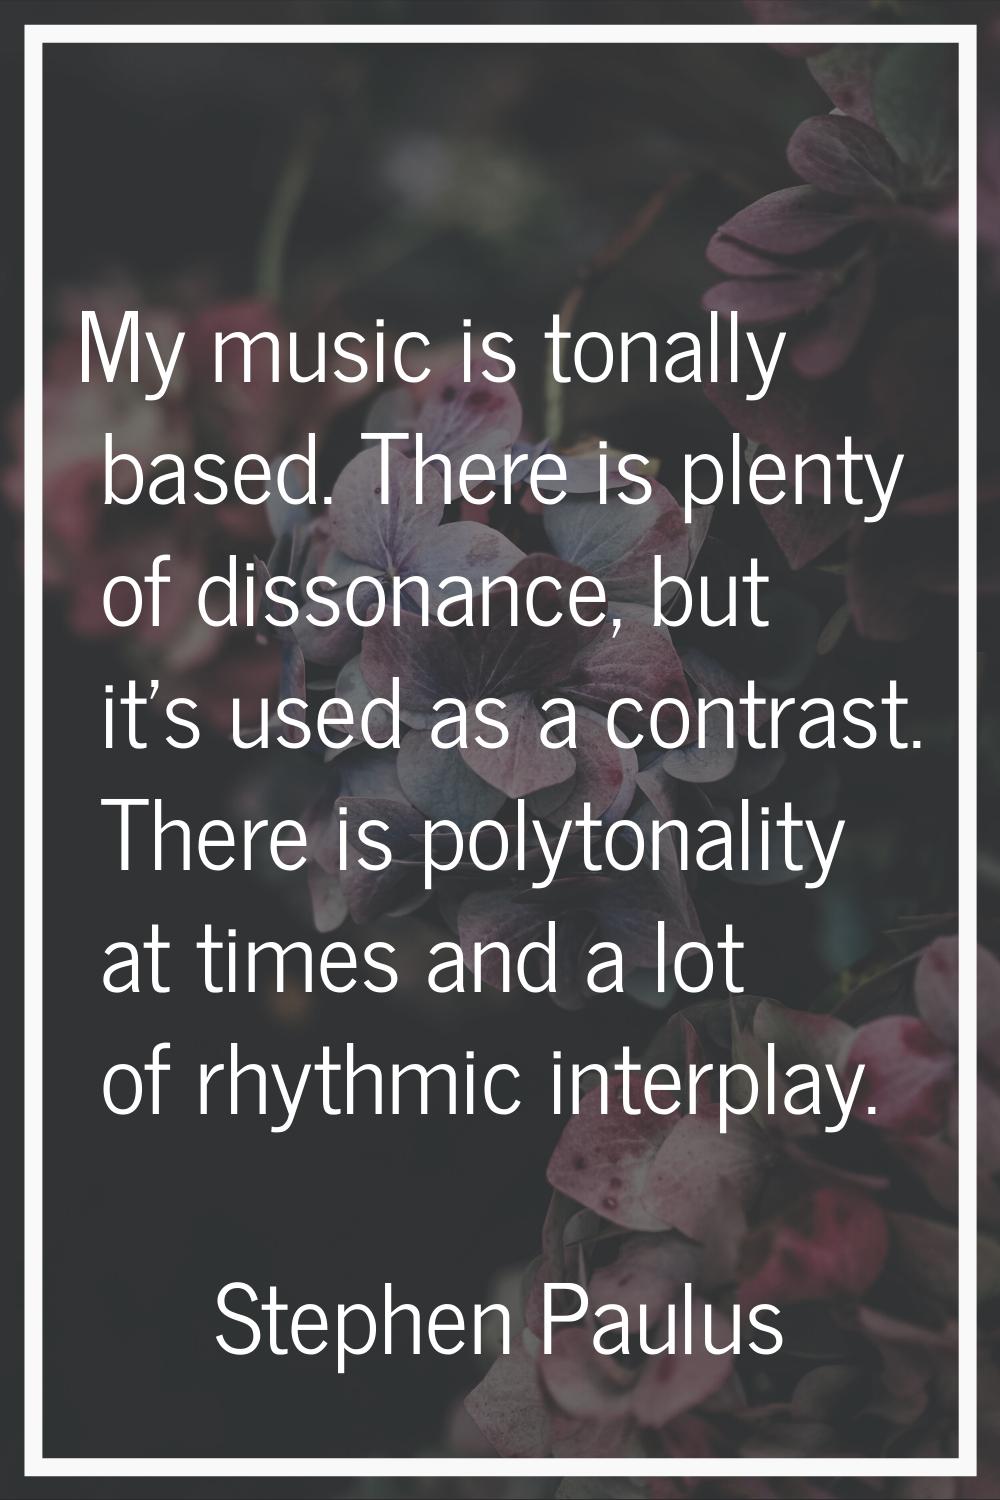 My music is tonally based. There is plenty of dissonance, but it's used as a contrast. There is pol